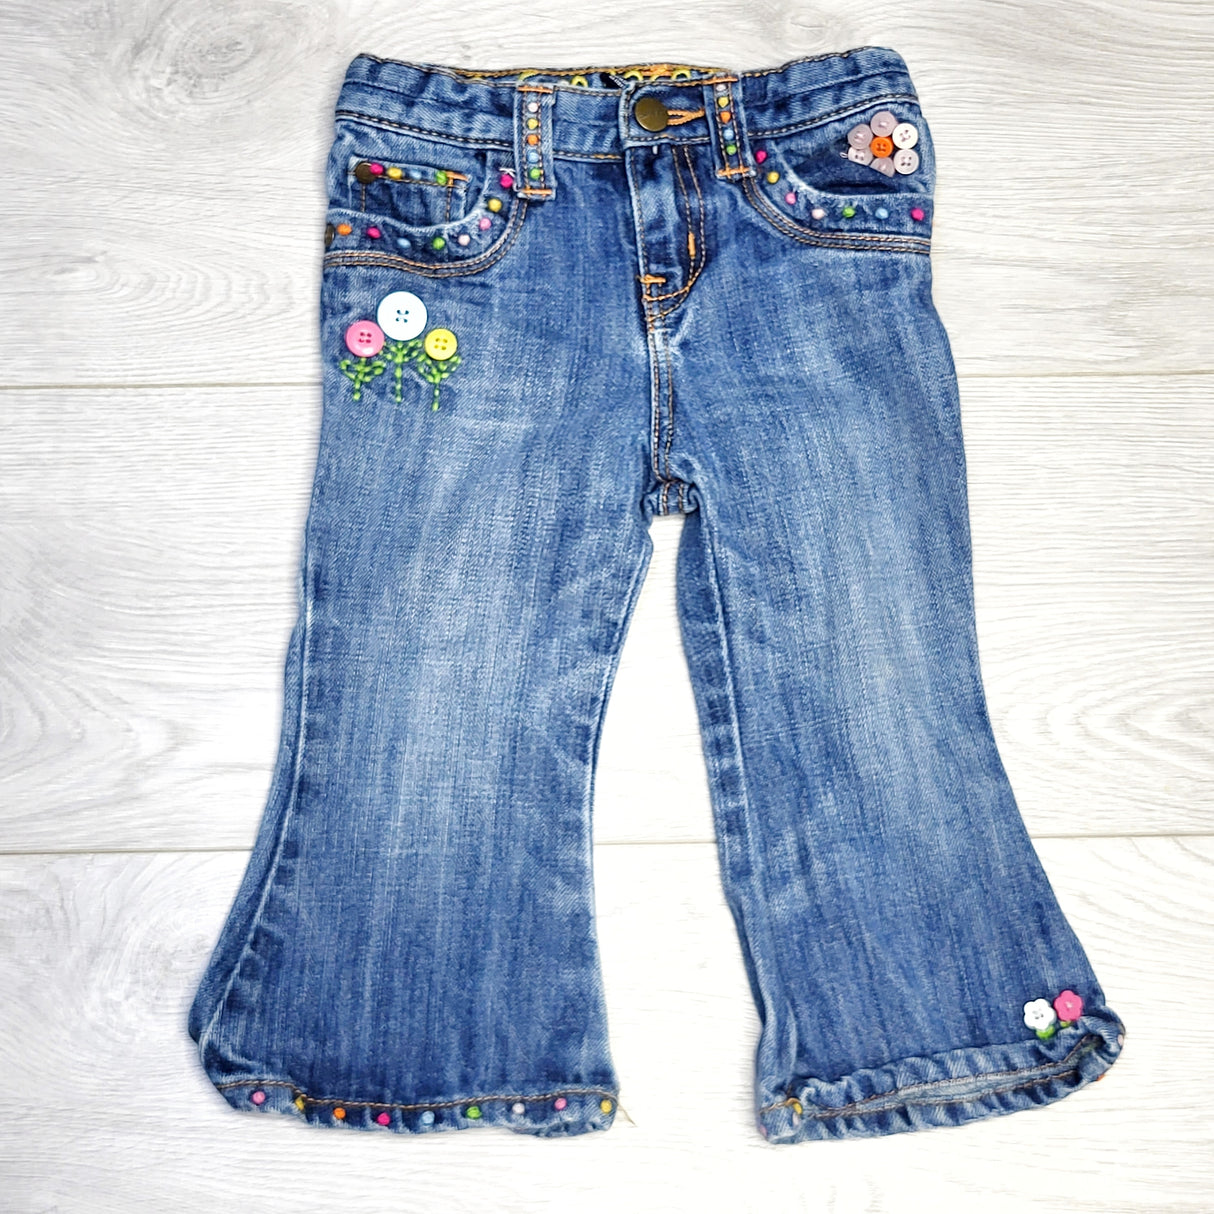 GDM1 - Gap distressed jeans with embellishments, size 18-24 months